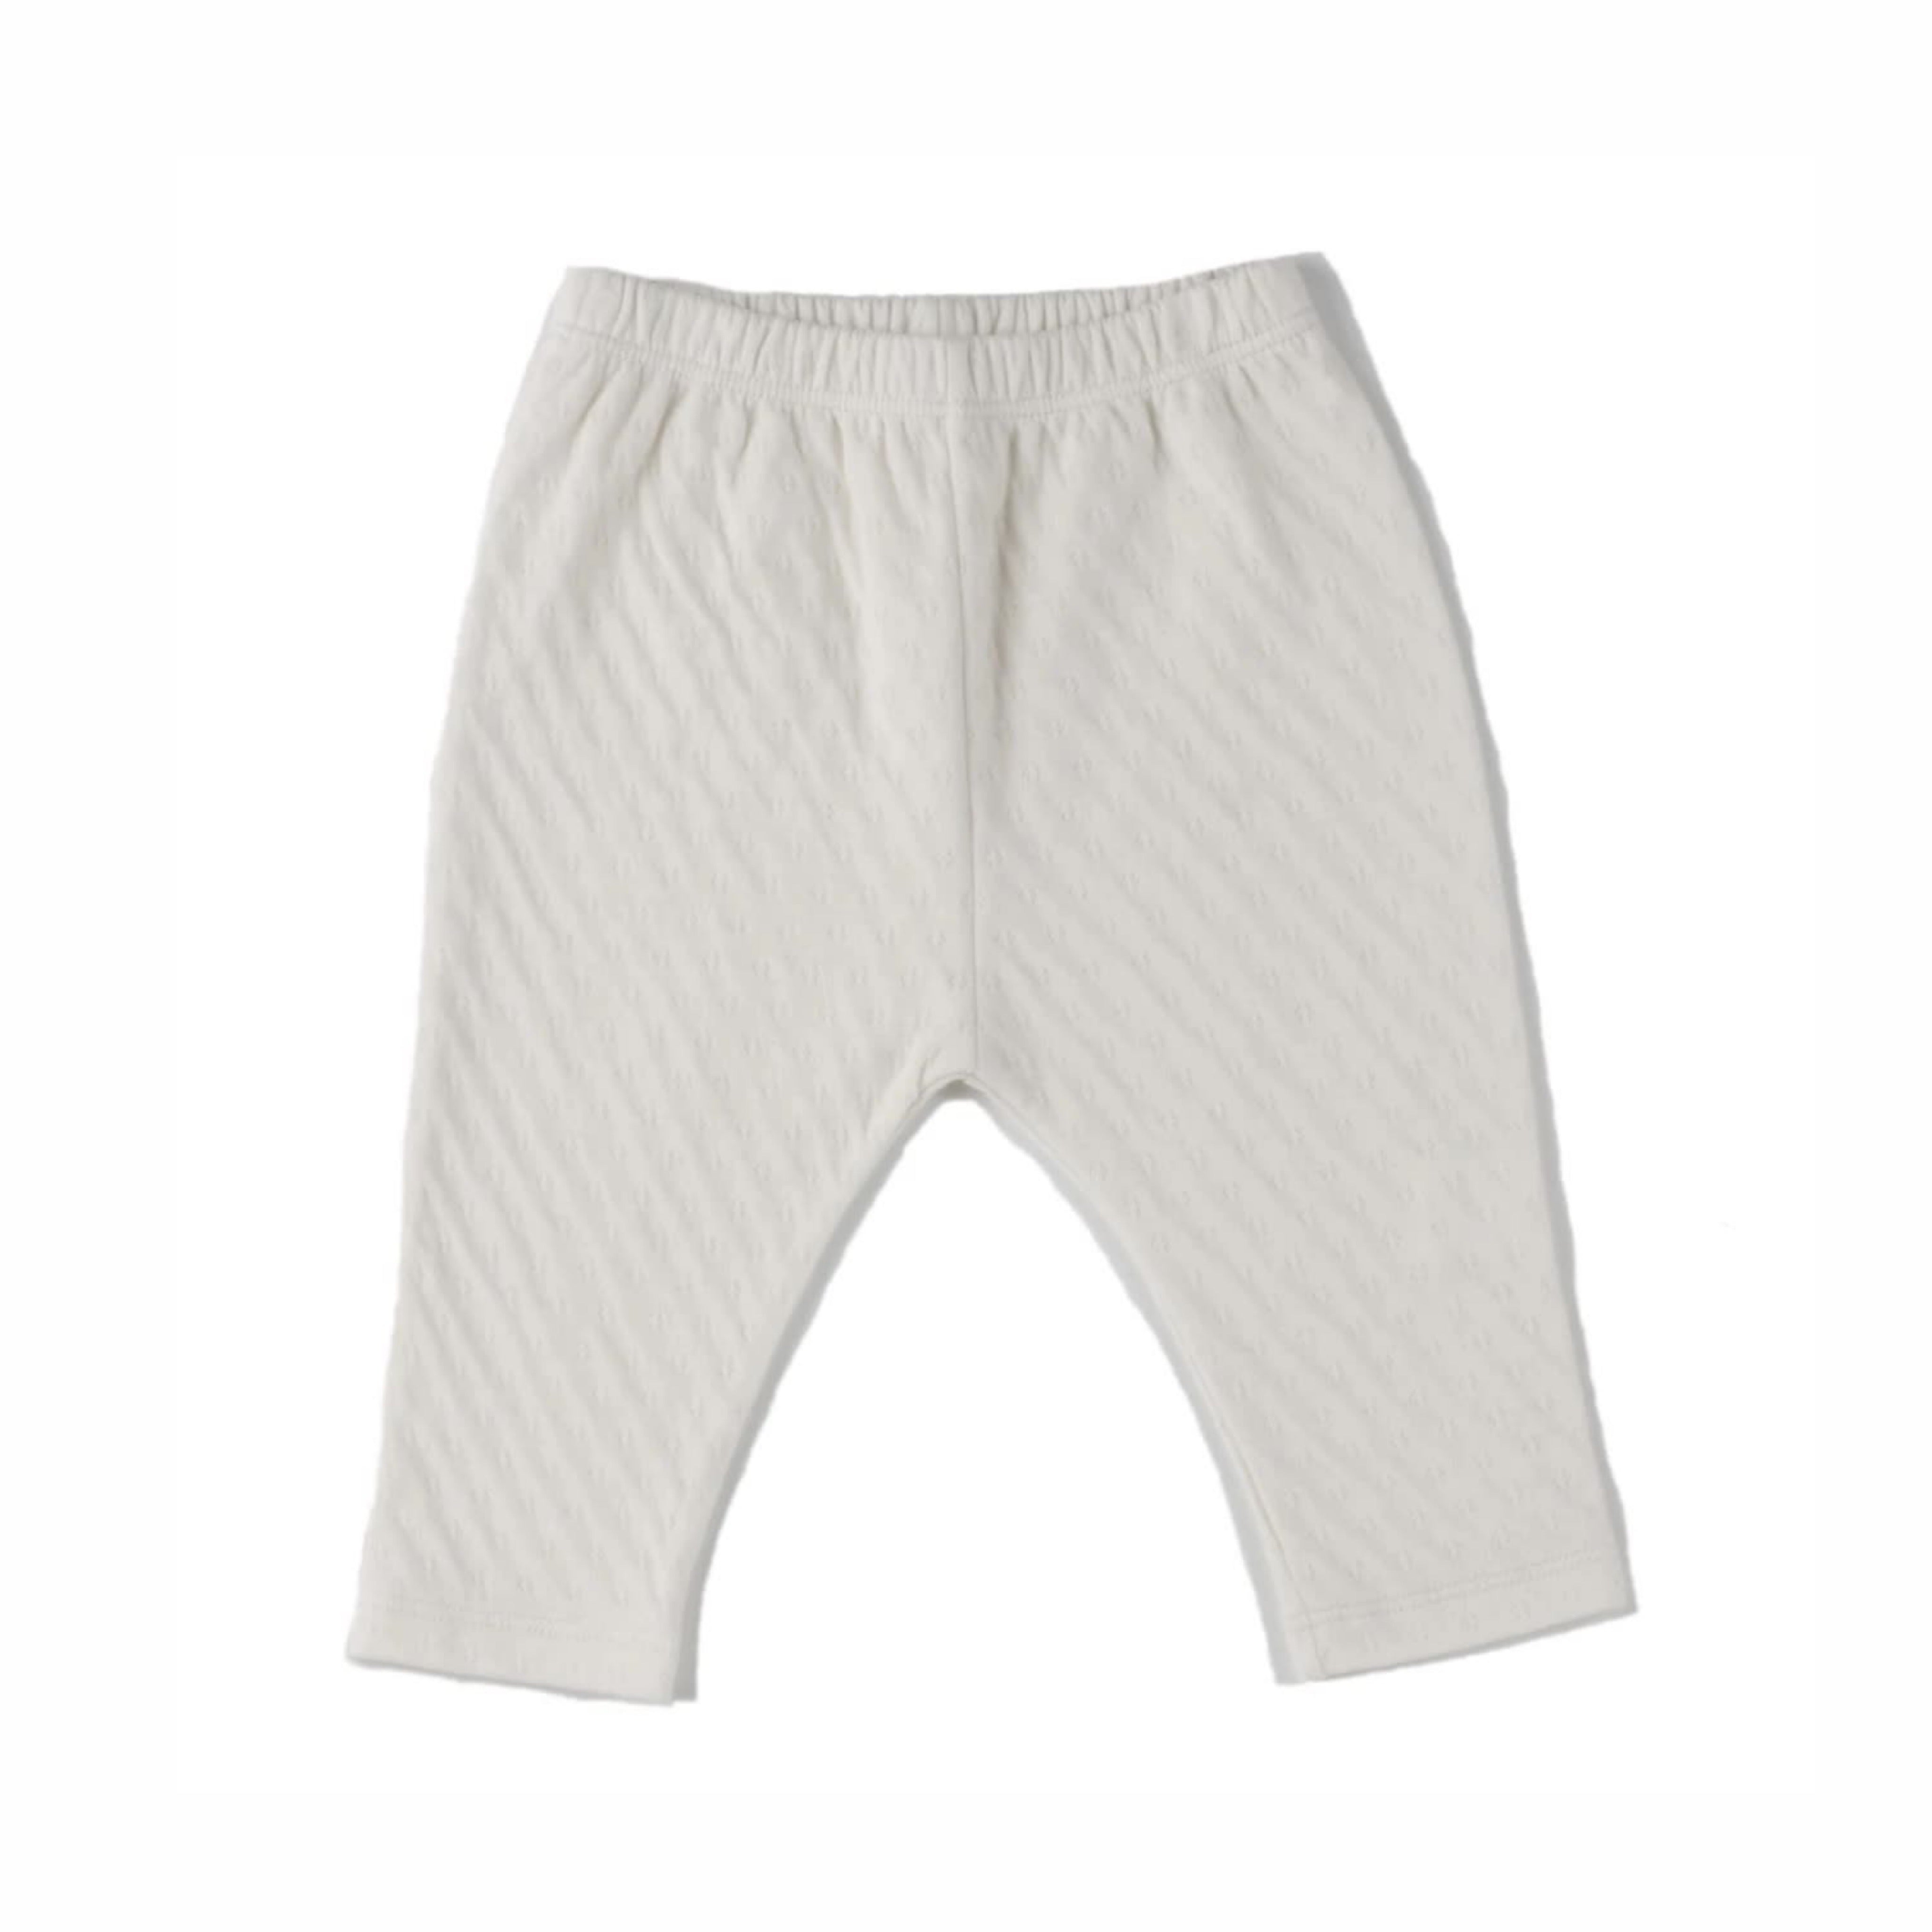 cream color straight leg pointelle ribbed pants with soft encased elastic at waistband. 100% organic cotton.